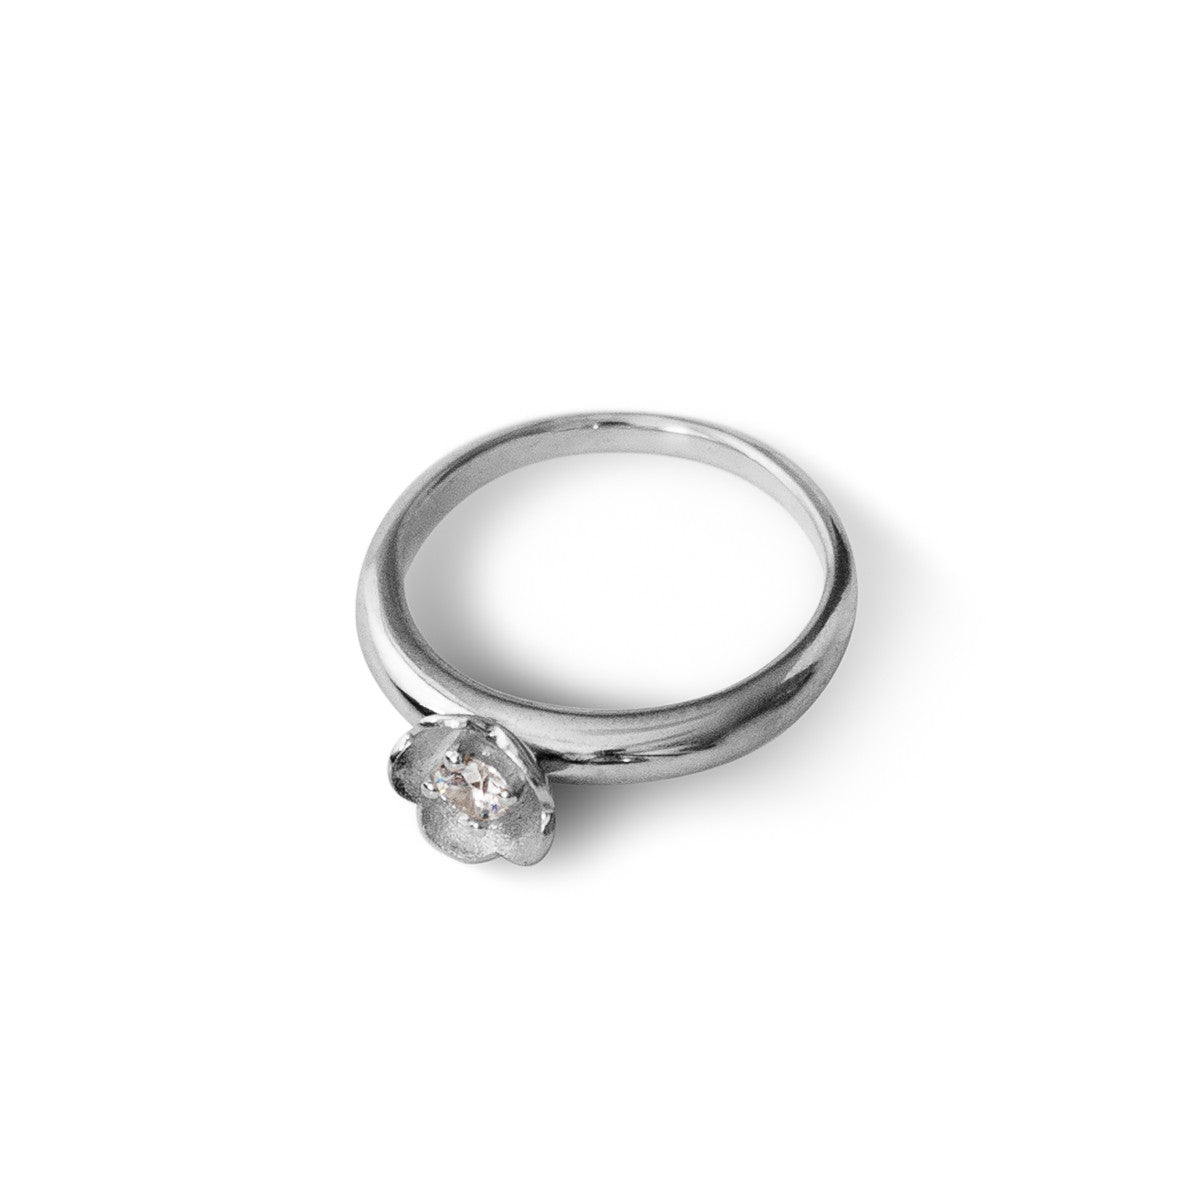 AFRODITE SOLITAIRE GOLD and DIAMOND